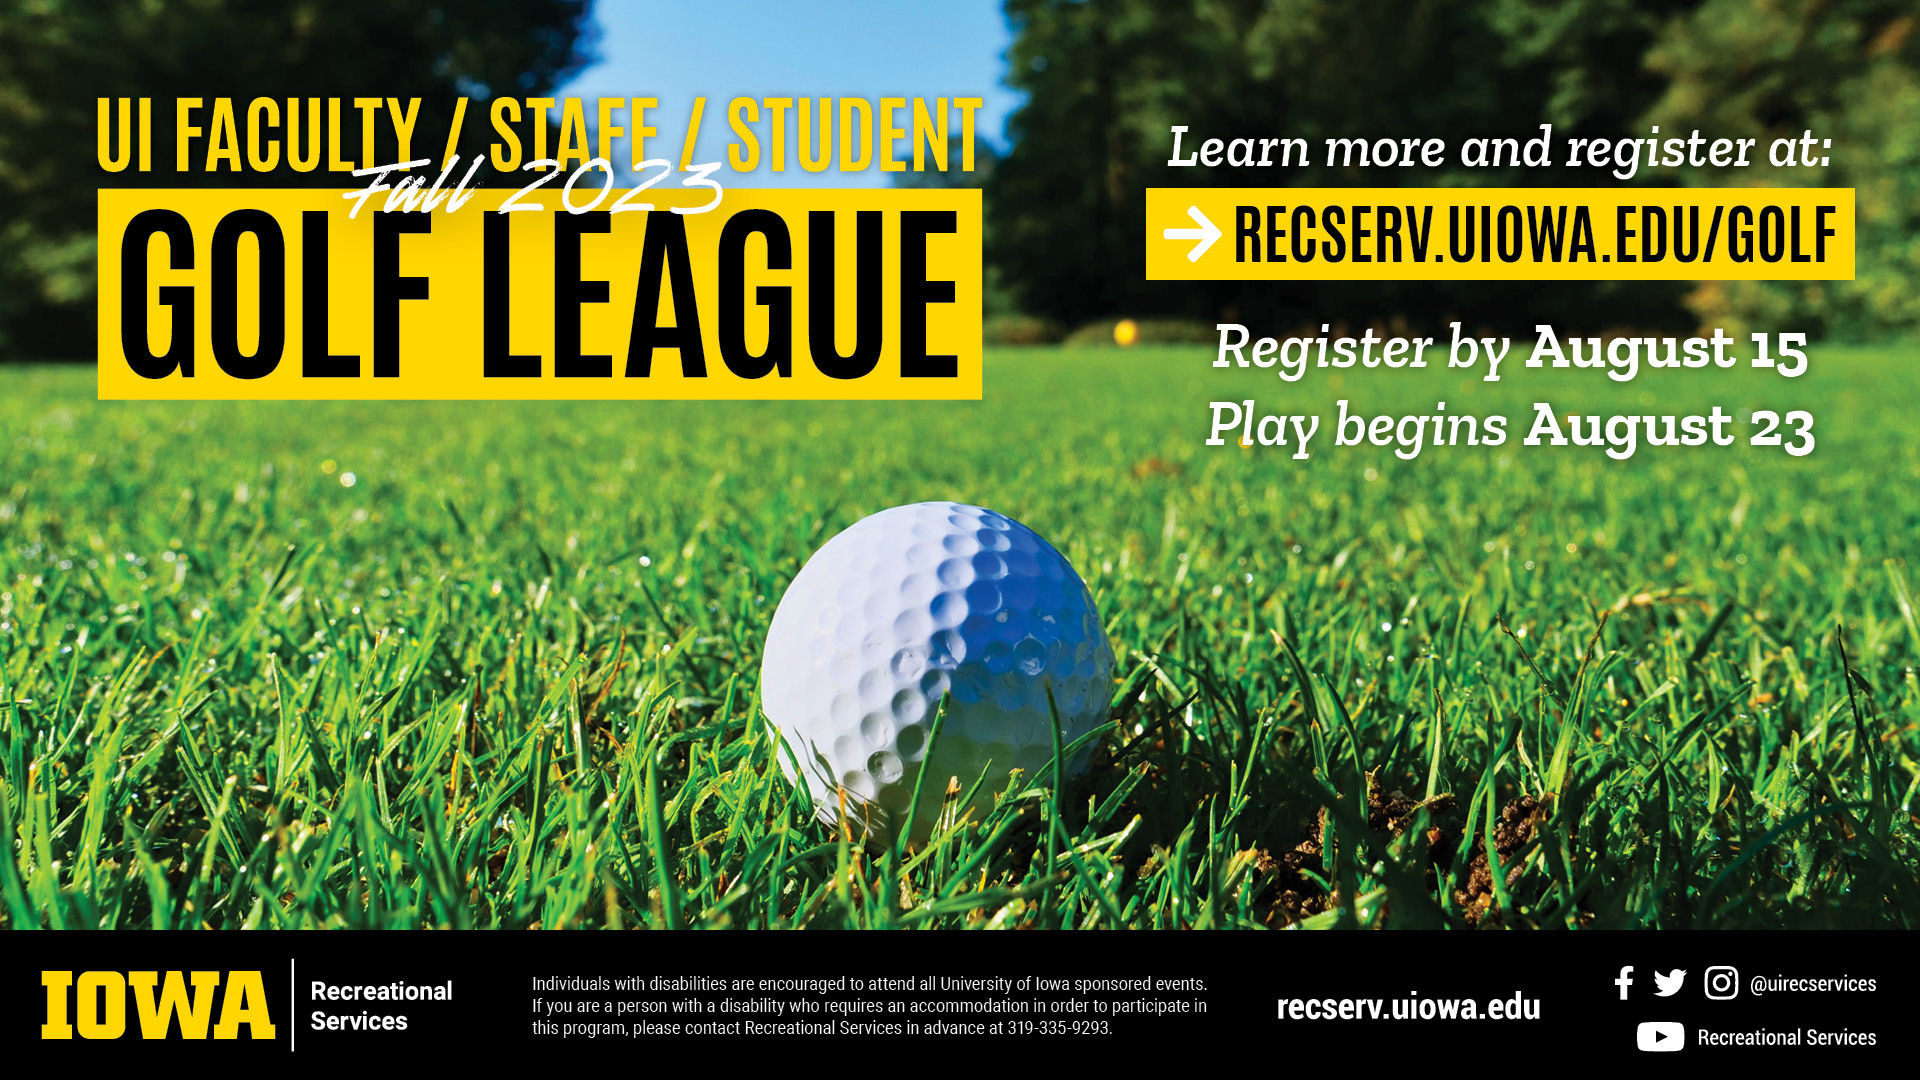 UI Faculty/Staff/Student Golf League Register by August 15